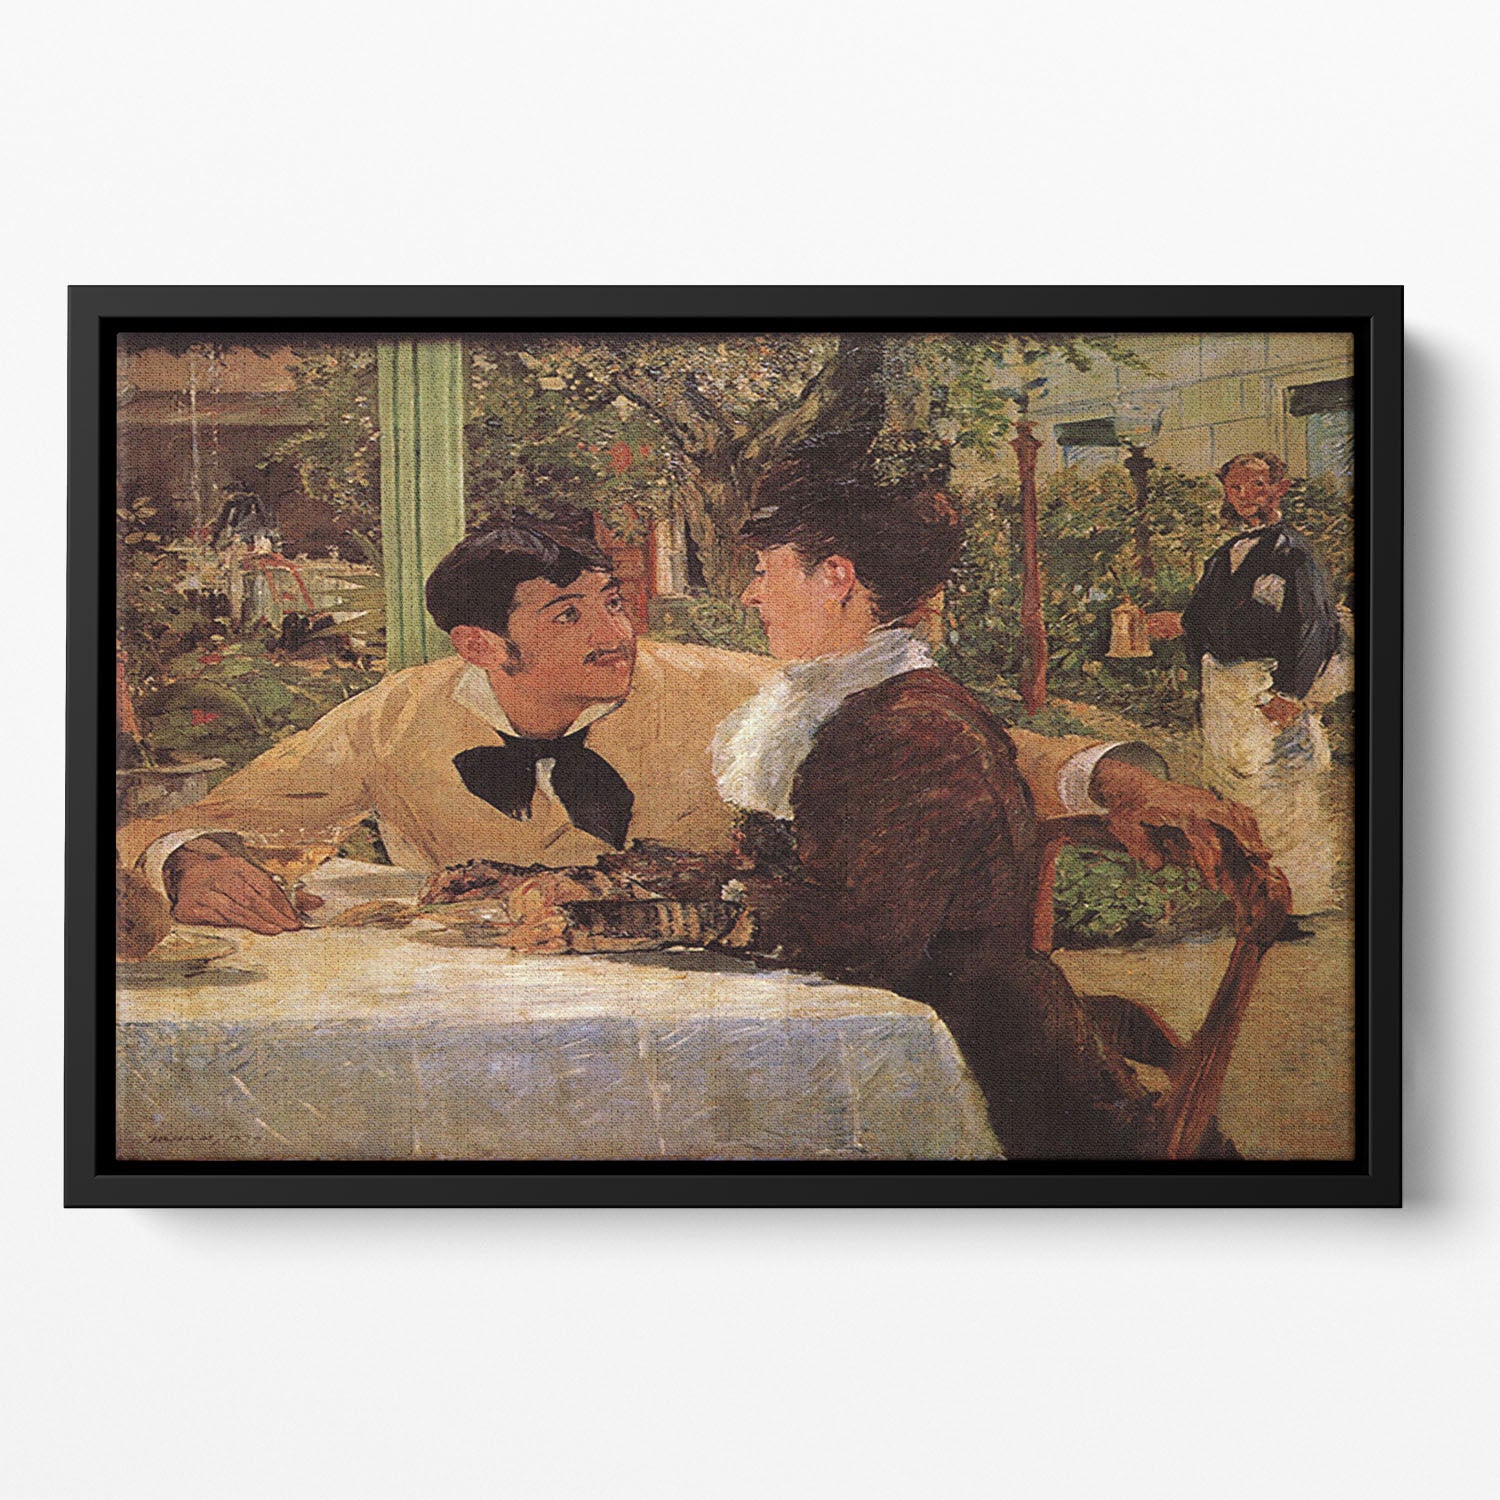 Pare Lathuille by Manet Floating Framed Canvas